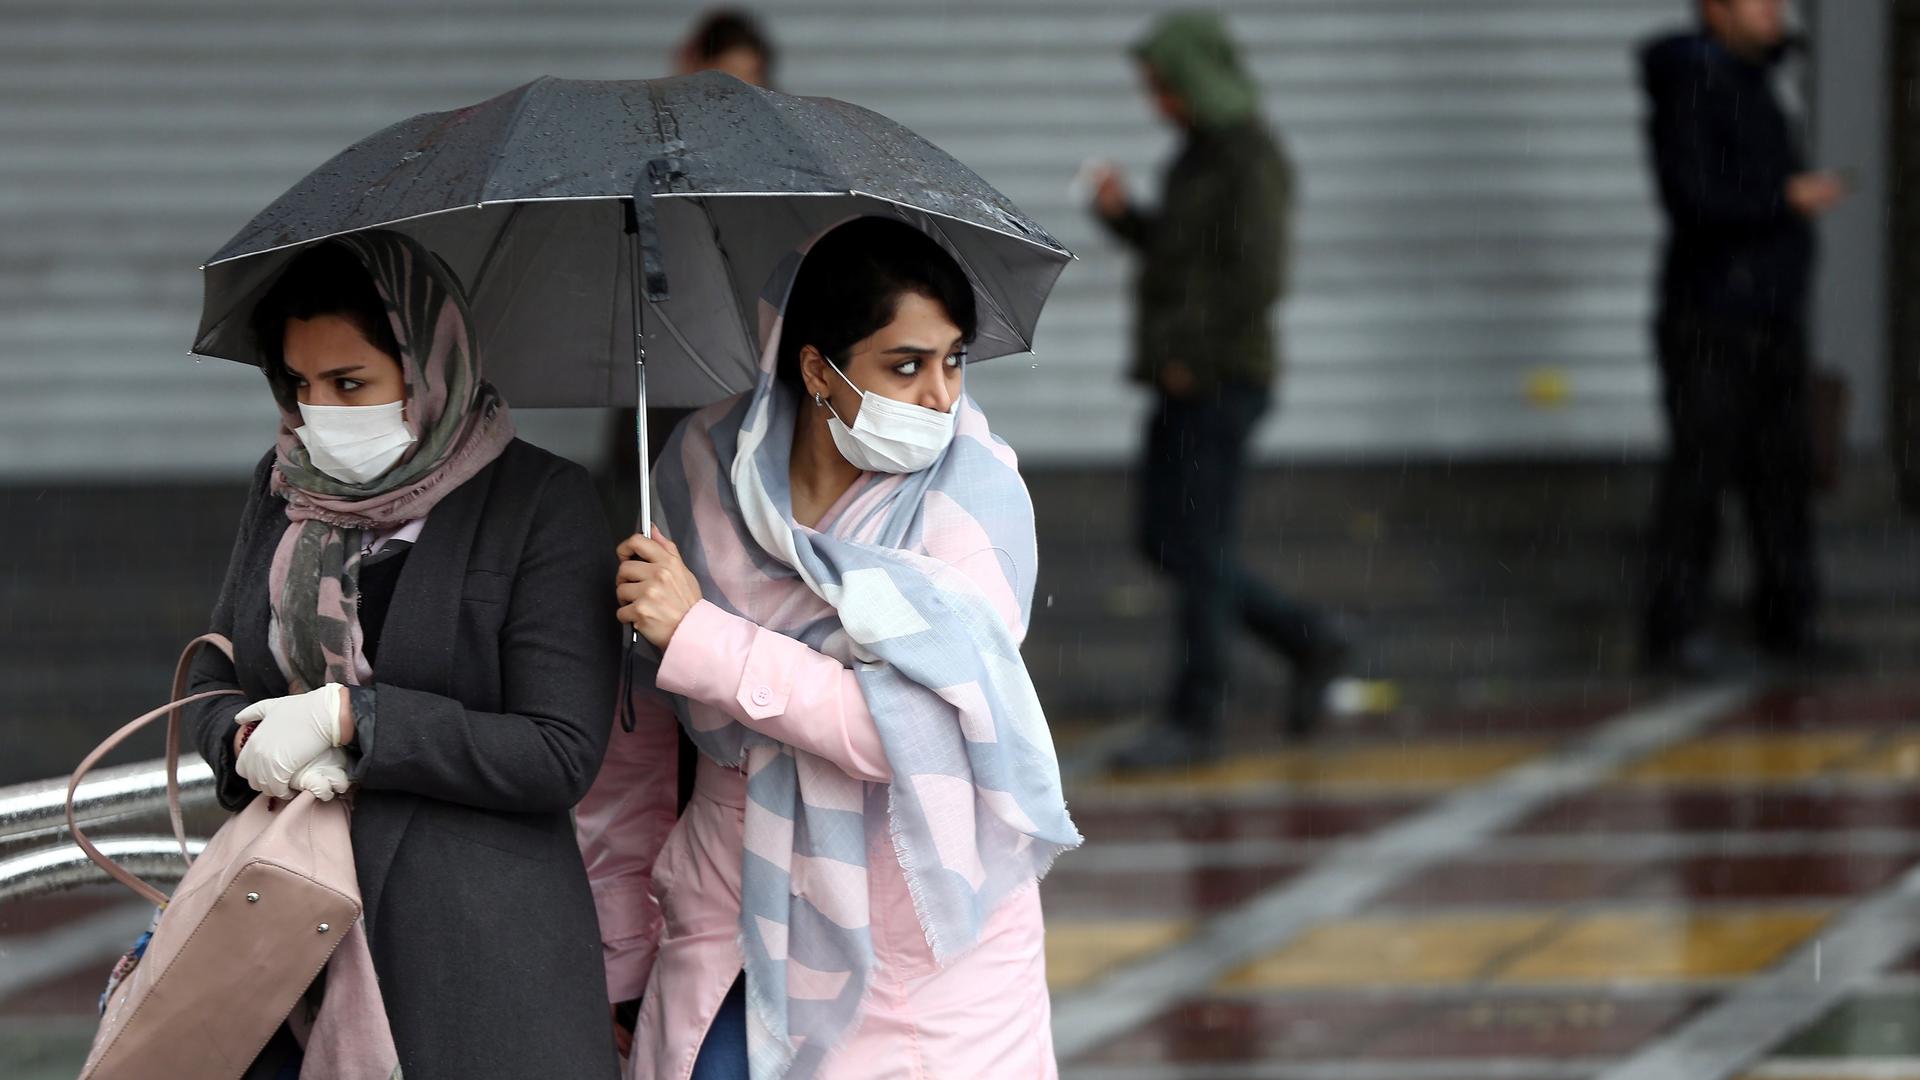 Iranian women wear protective masks to prevent contracting coronavirus as they walk in the street in Tehran, Iran, Feb. 25, 2020.